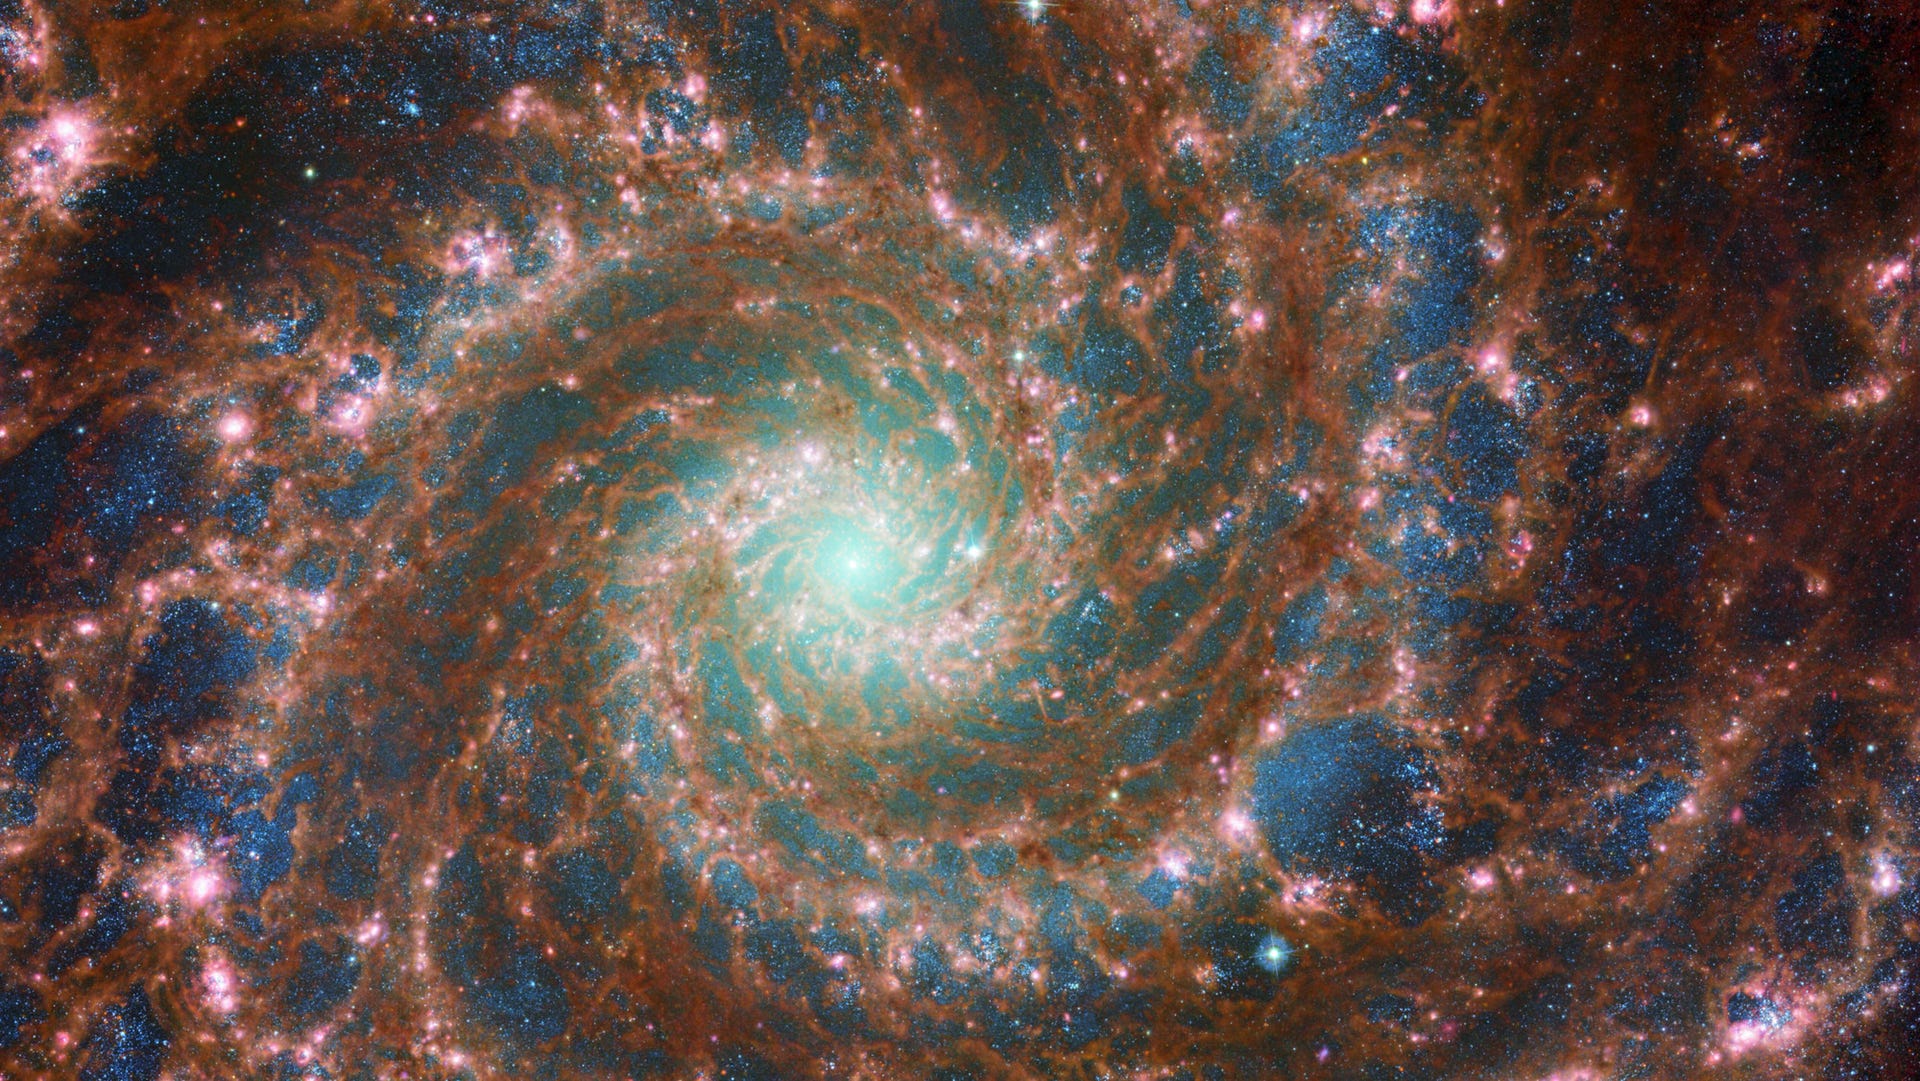 A swirly, sparkly spiral galaxy shimmers in shades of blue, pink, red and green.